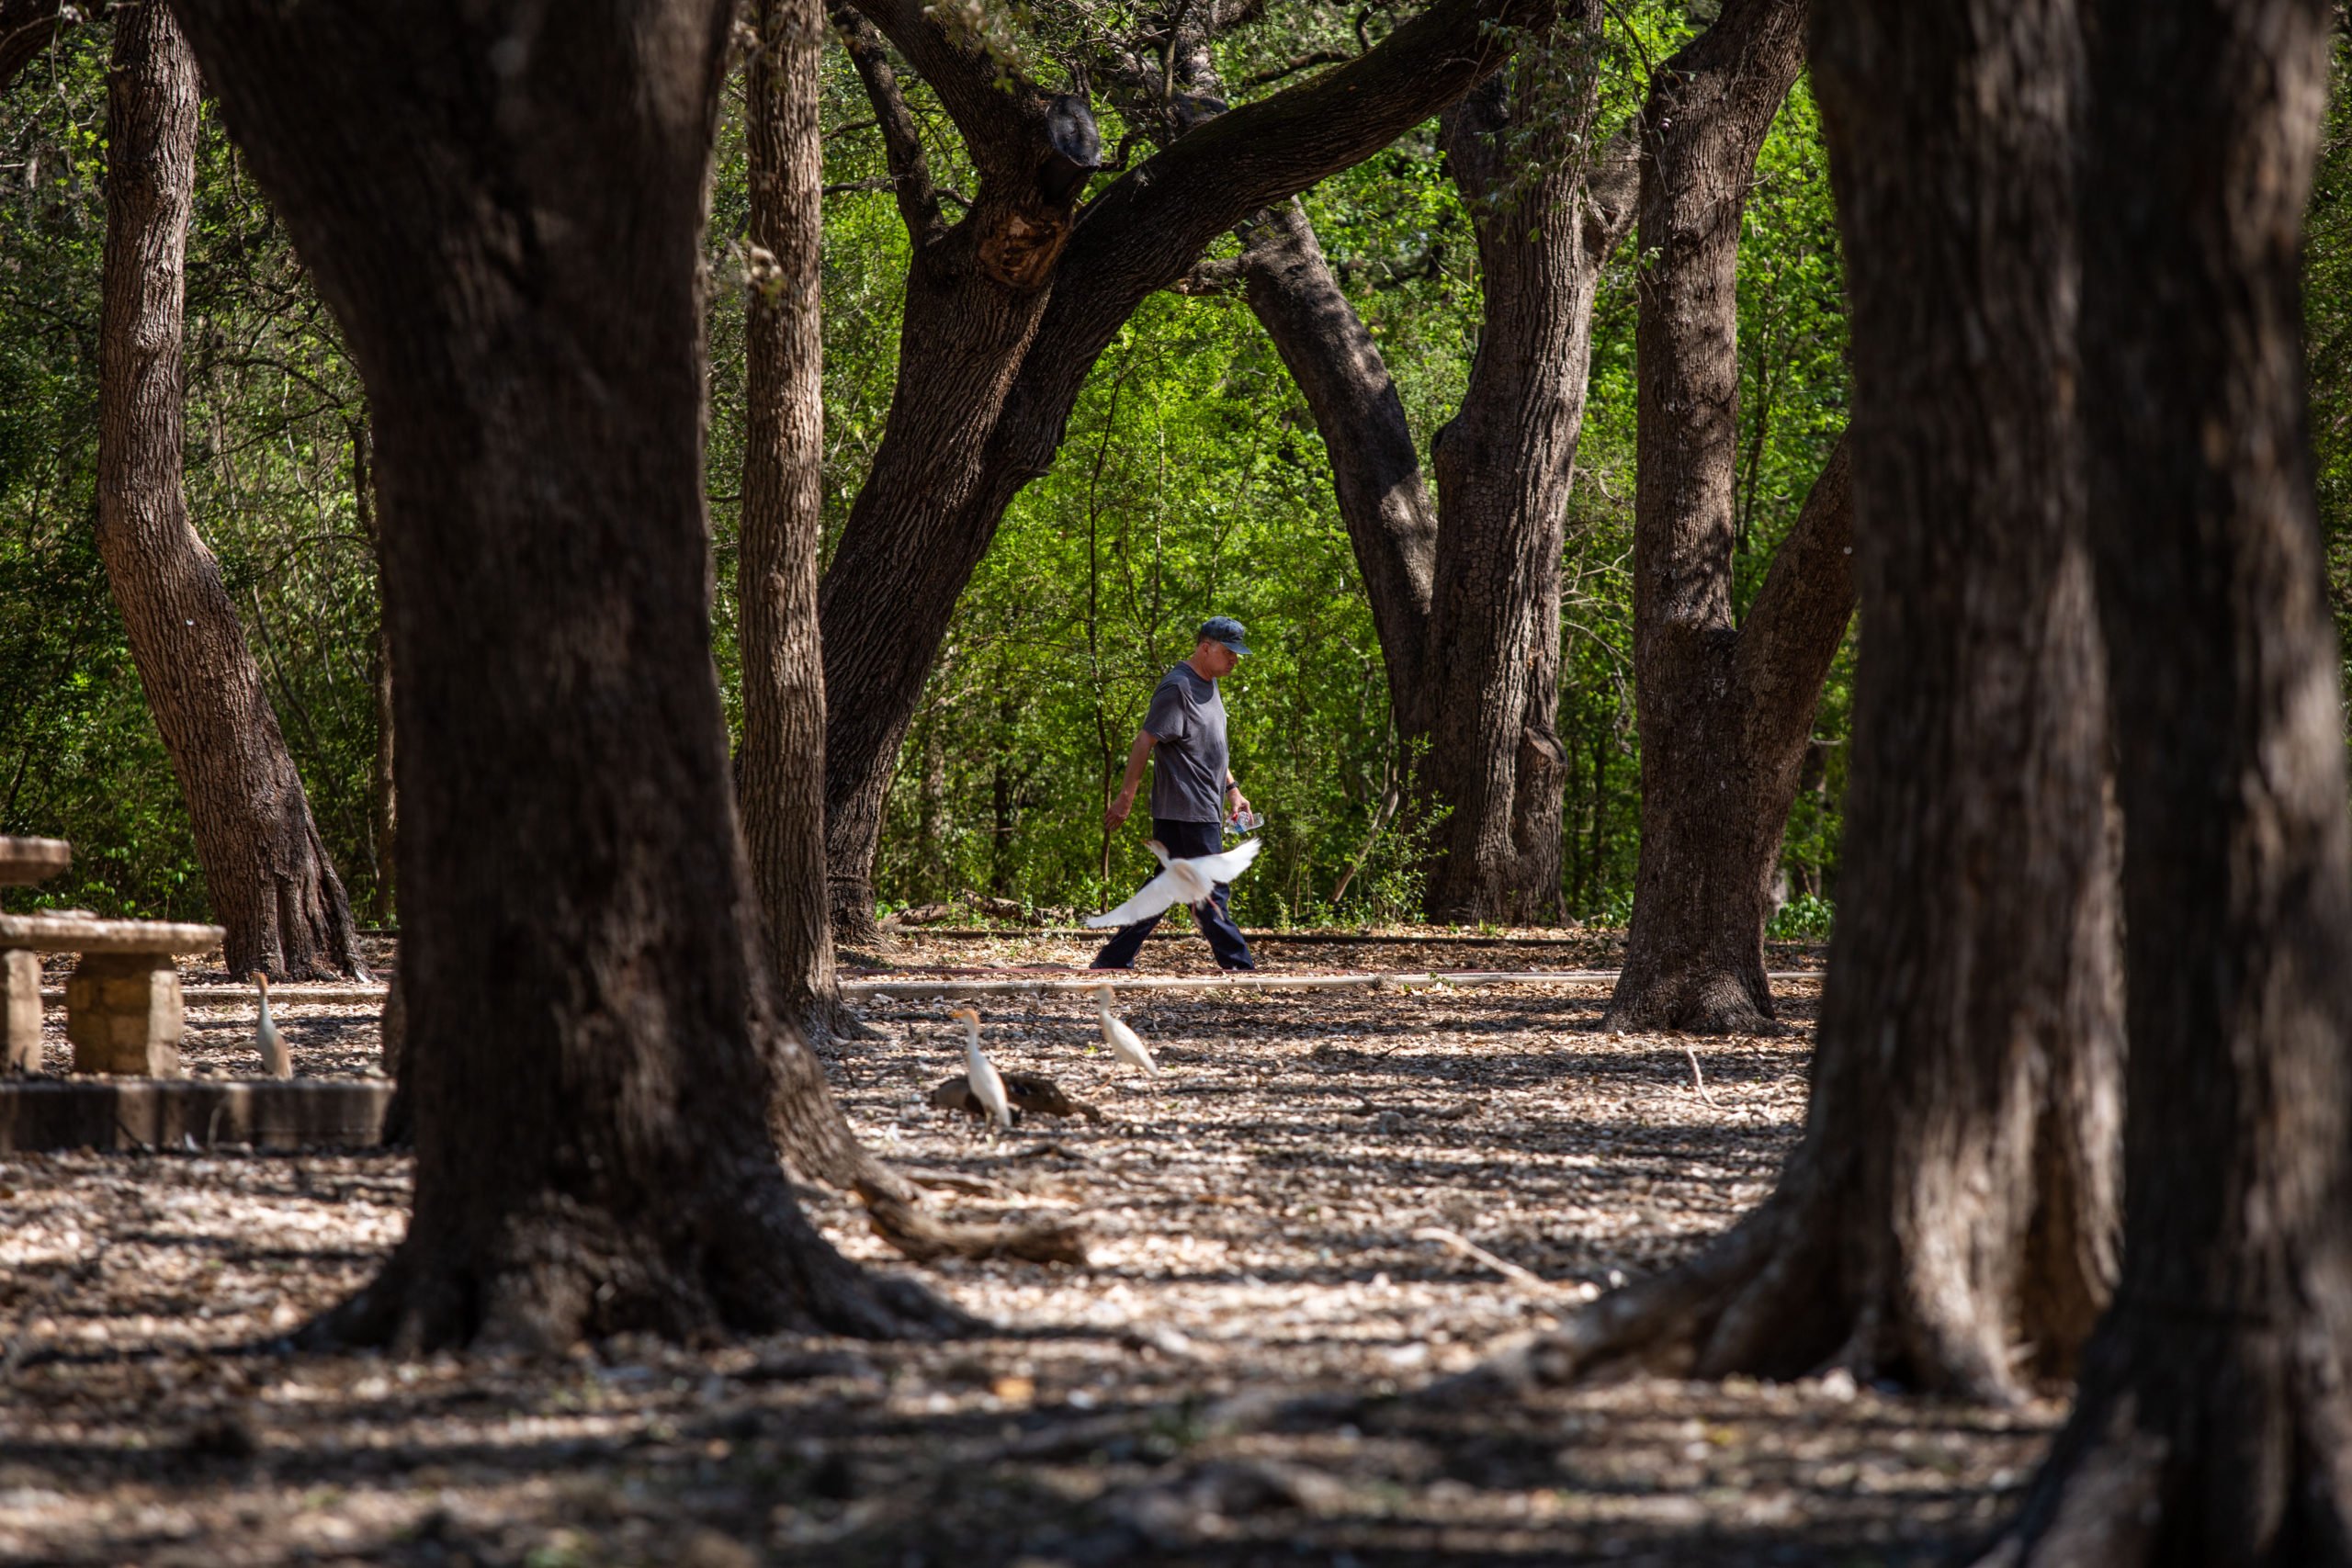 A person walks through a protected bird rookery set in live oak trees in Brackenridge park.